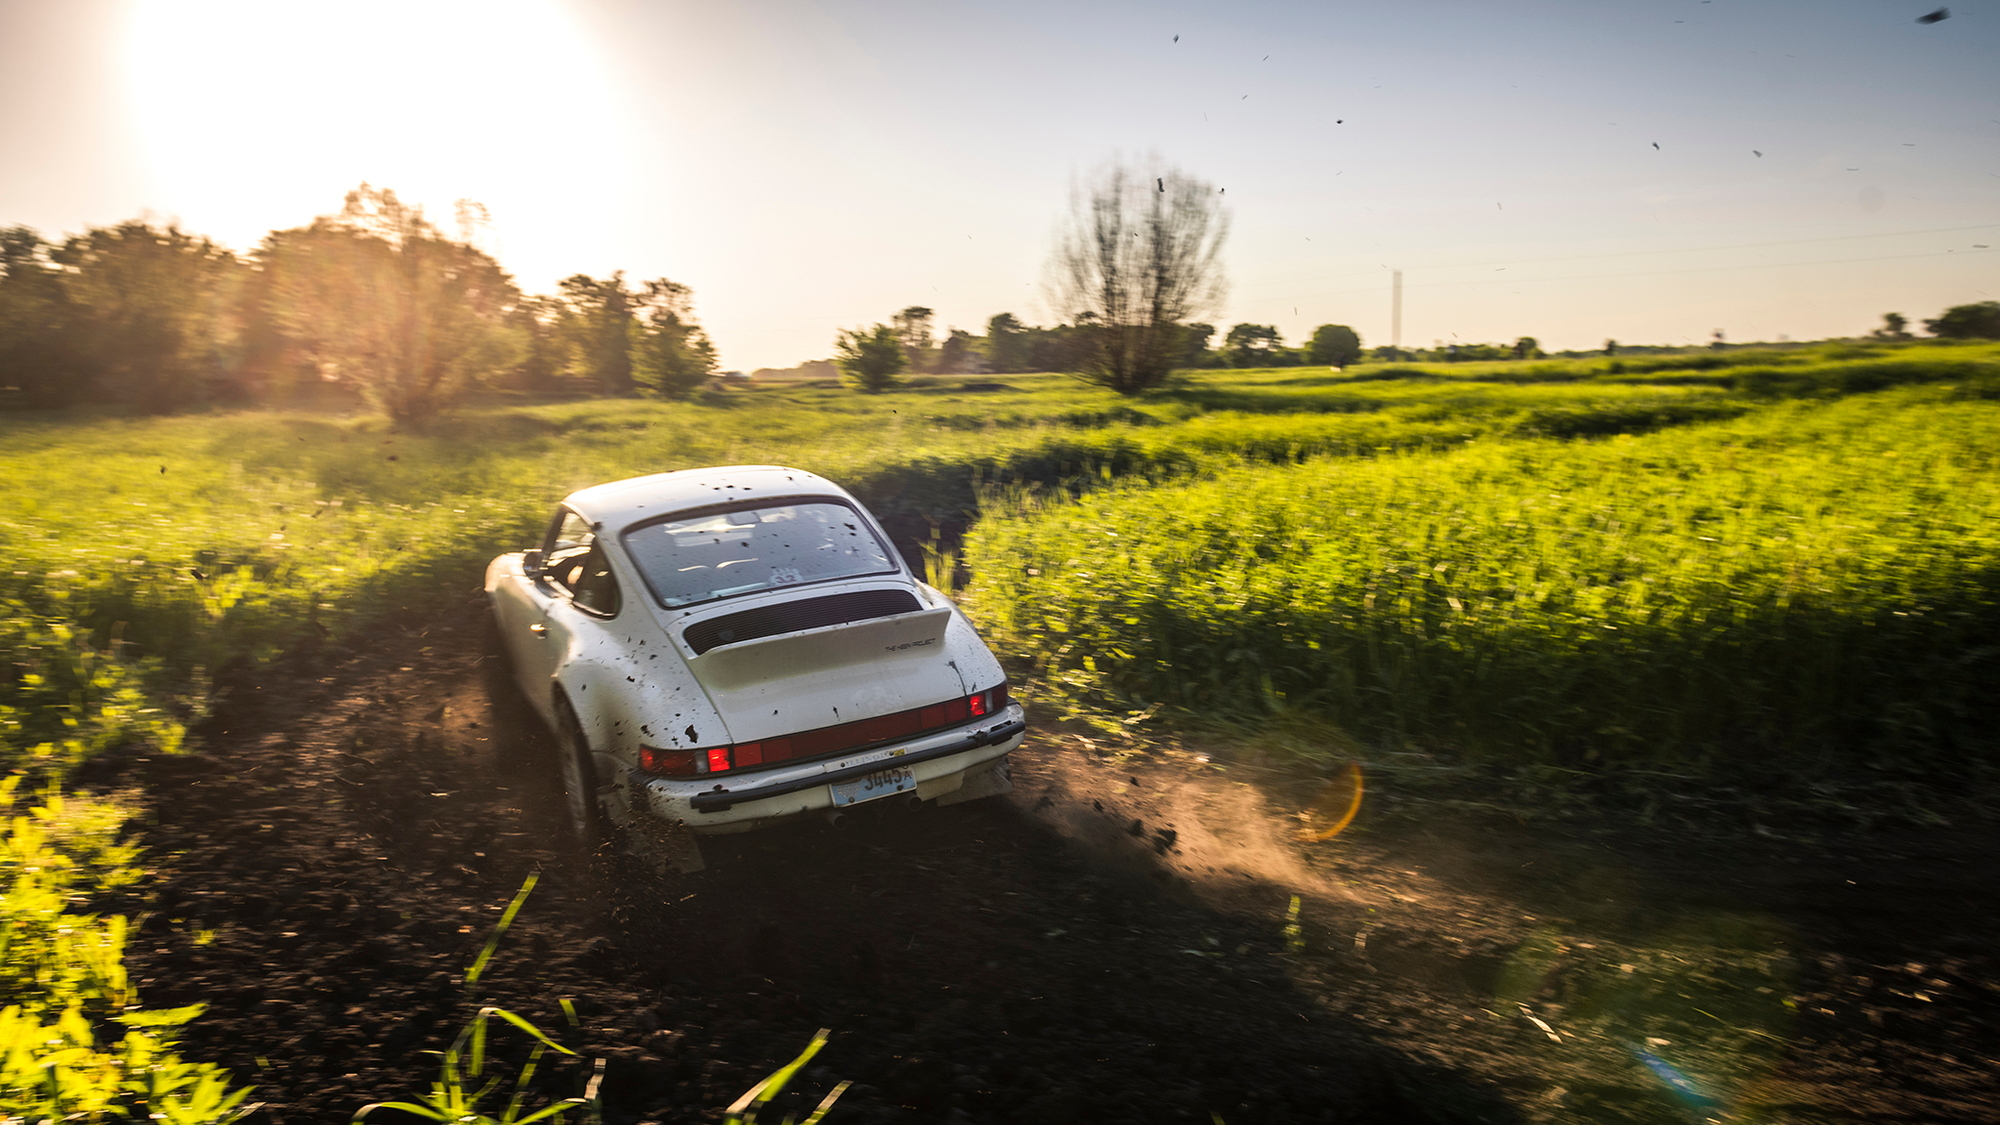 The Keen Project Safari 911 No. 2, photo by Alex Bellus